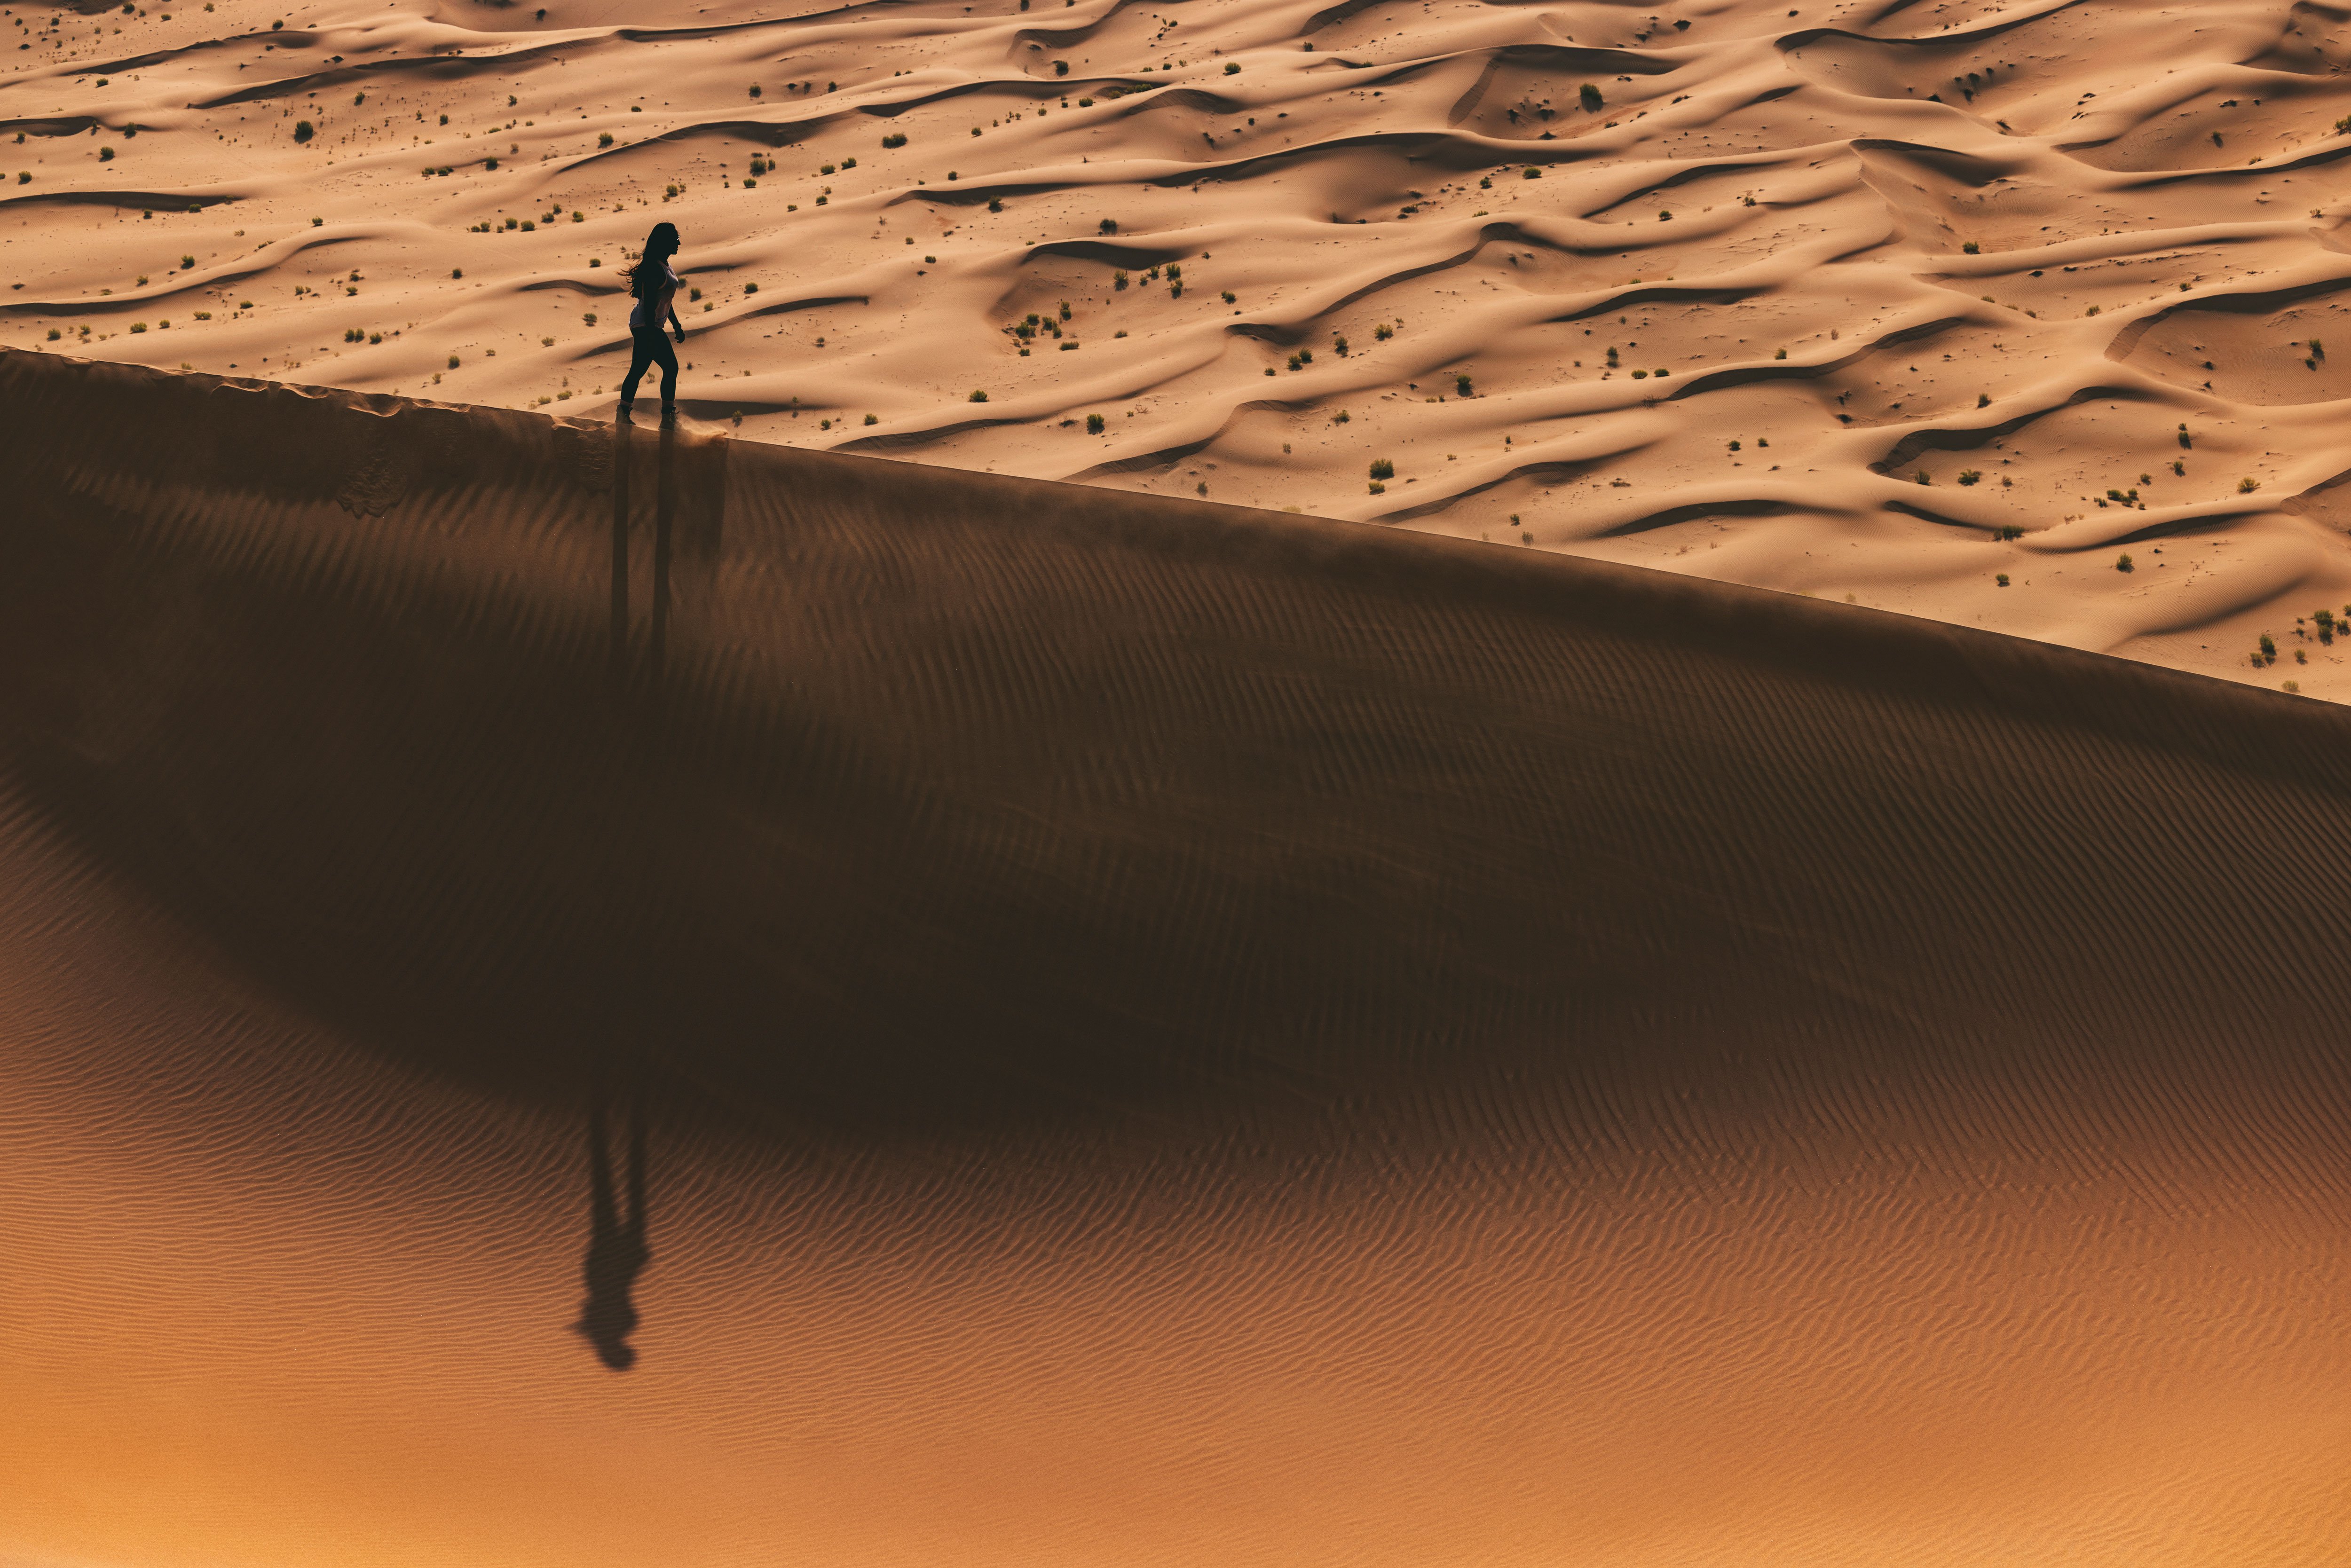 Woman walking in the middle of sand dunes in Al Dhafra